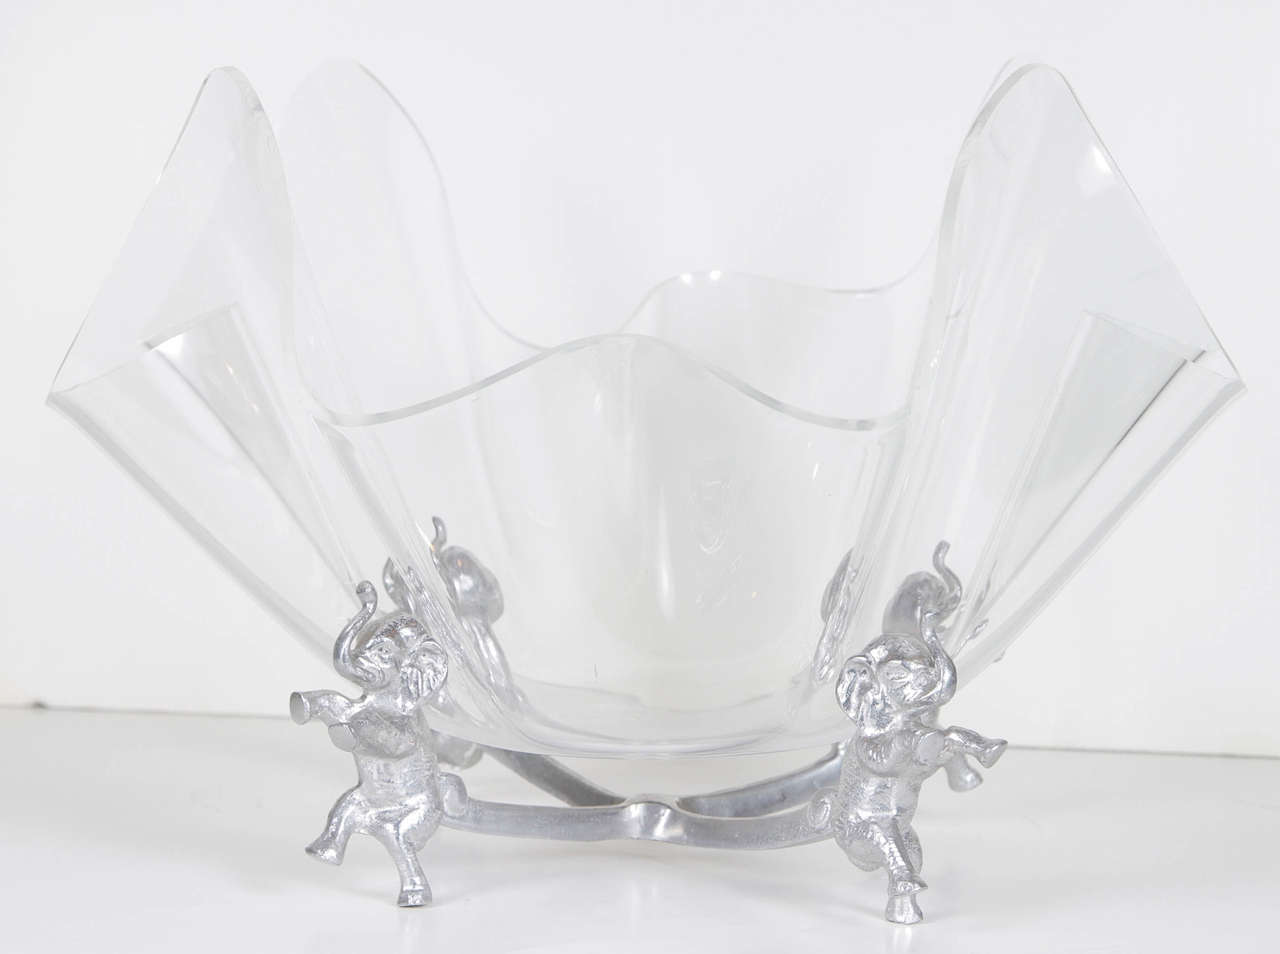 Handkerchief style acrylic bowl on silvered stand with elephants holding the bowl.